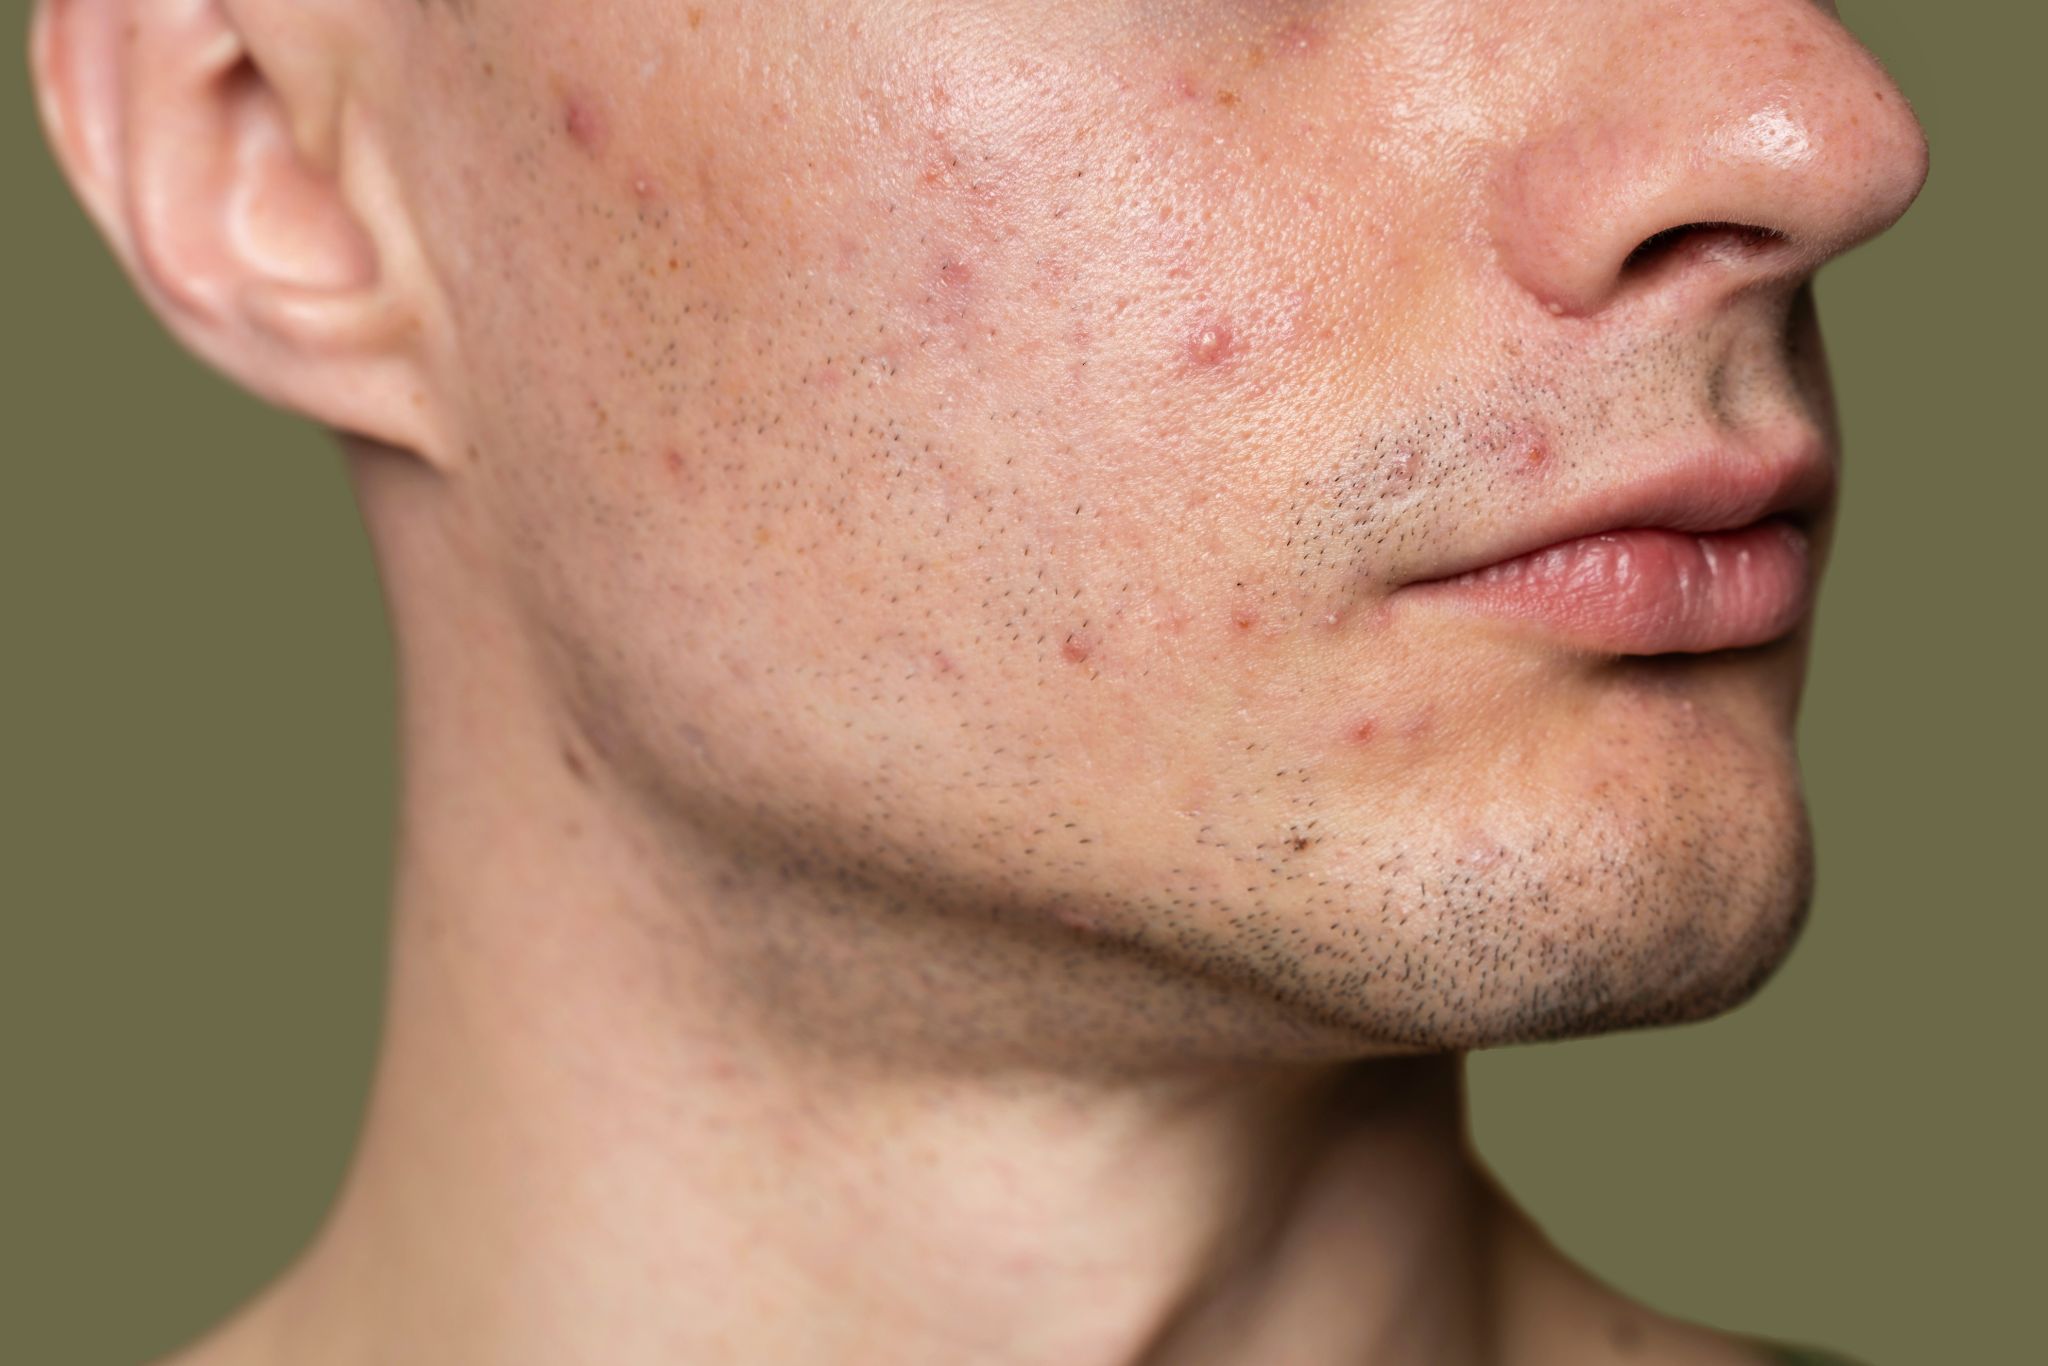 Clogged pores can lead to blackheads and pimples.